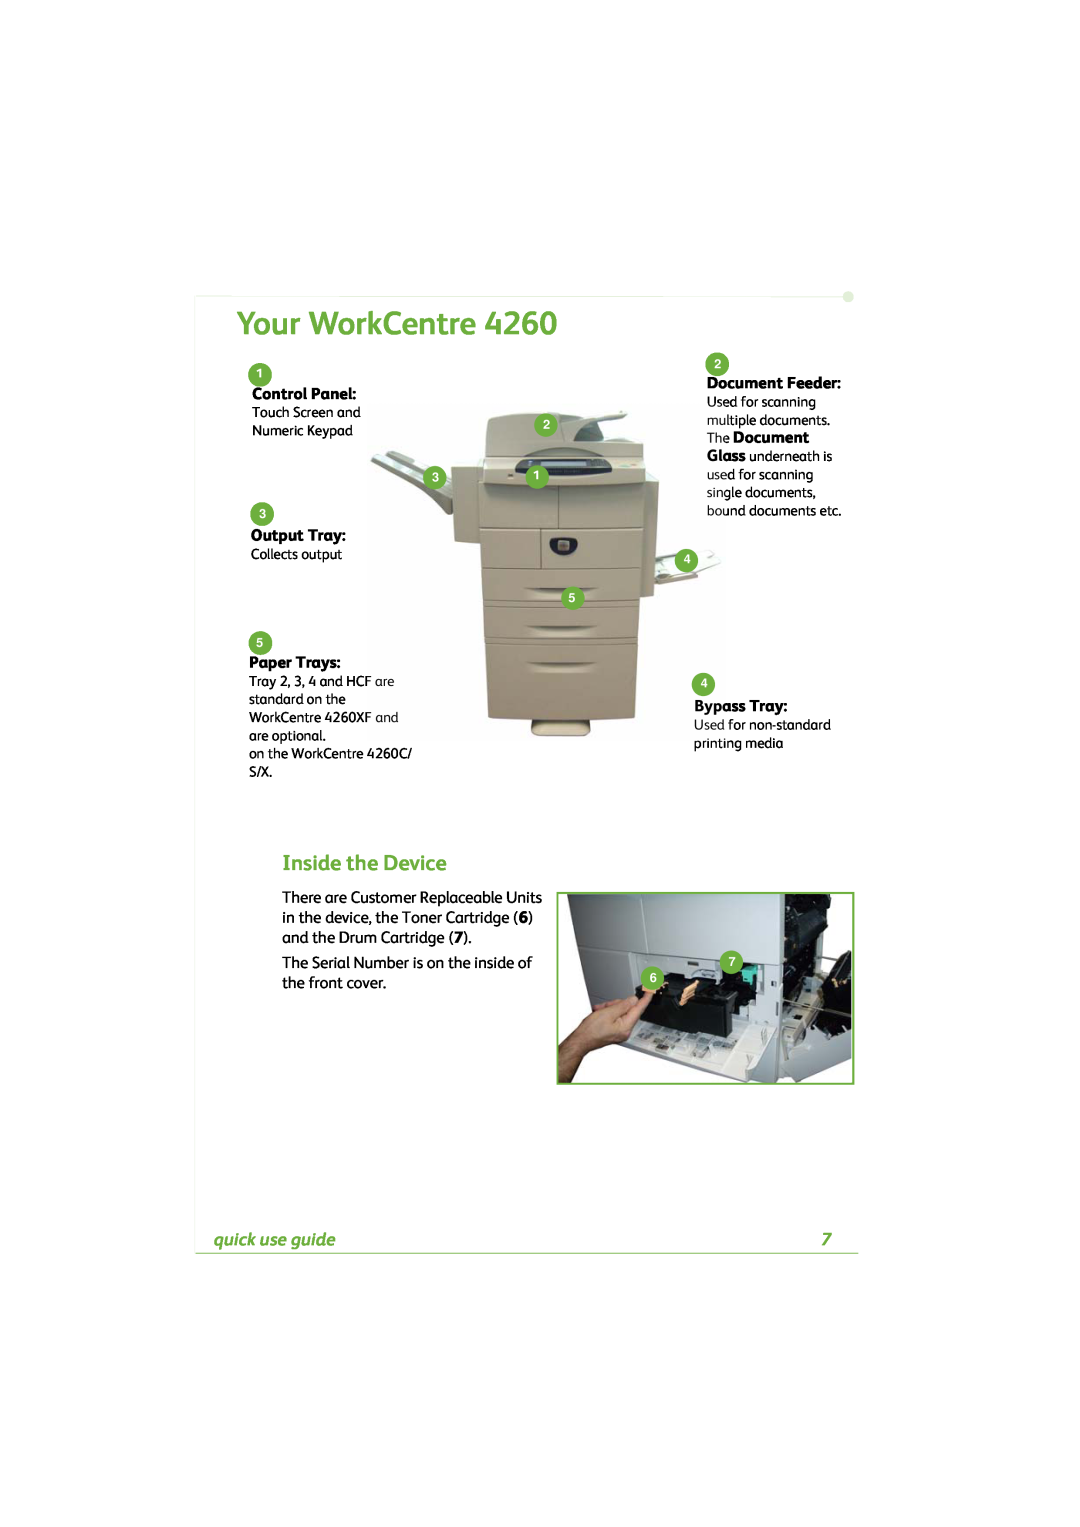 Xerox 4260C manual Your WorkCentre, Inside the Device, quick use guide 